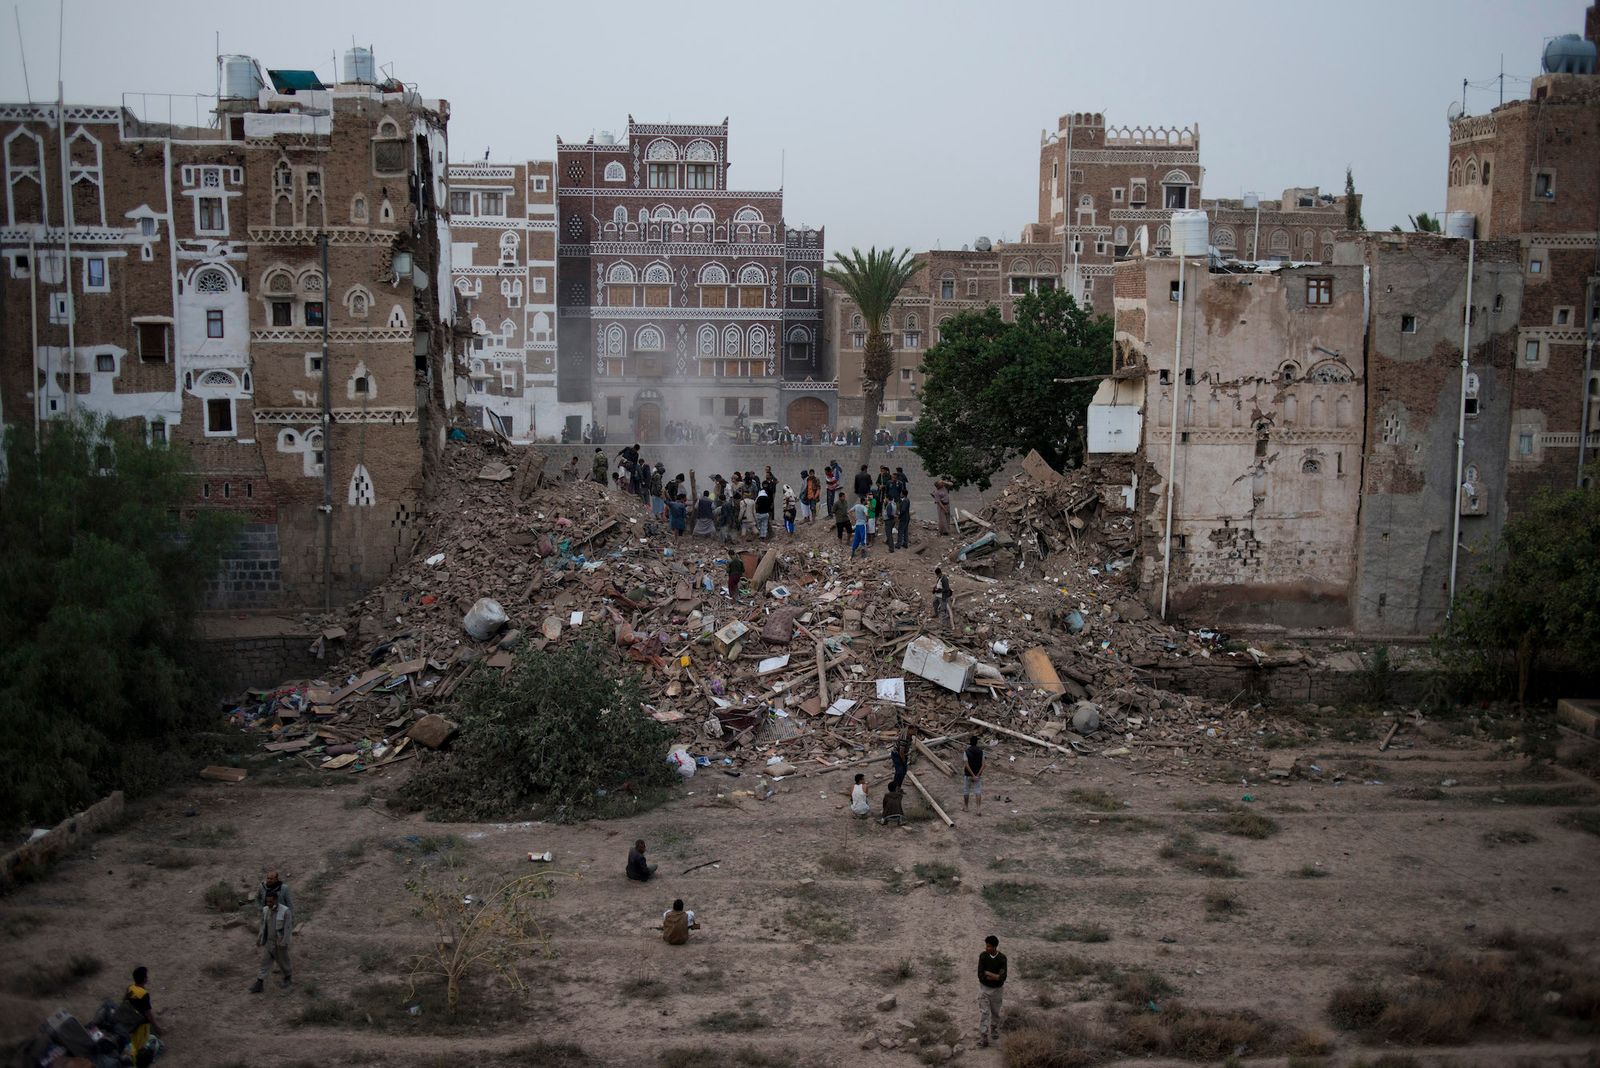 © Alex Potter - Yemenis search for their neighbors after an airstrike hit homes in the Old City.